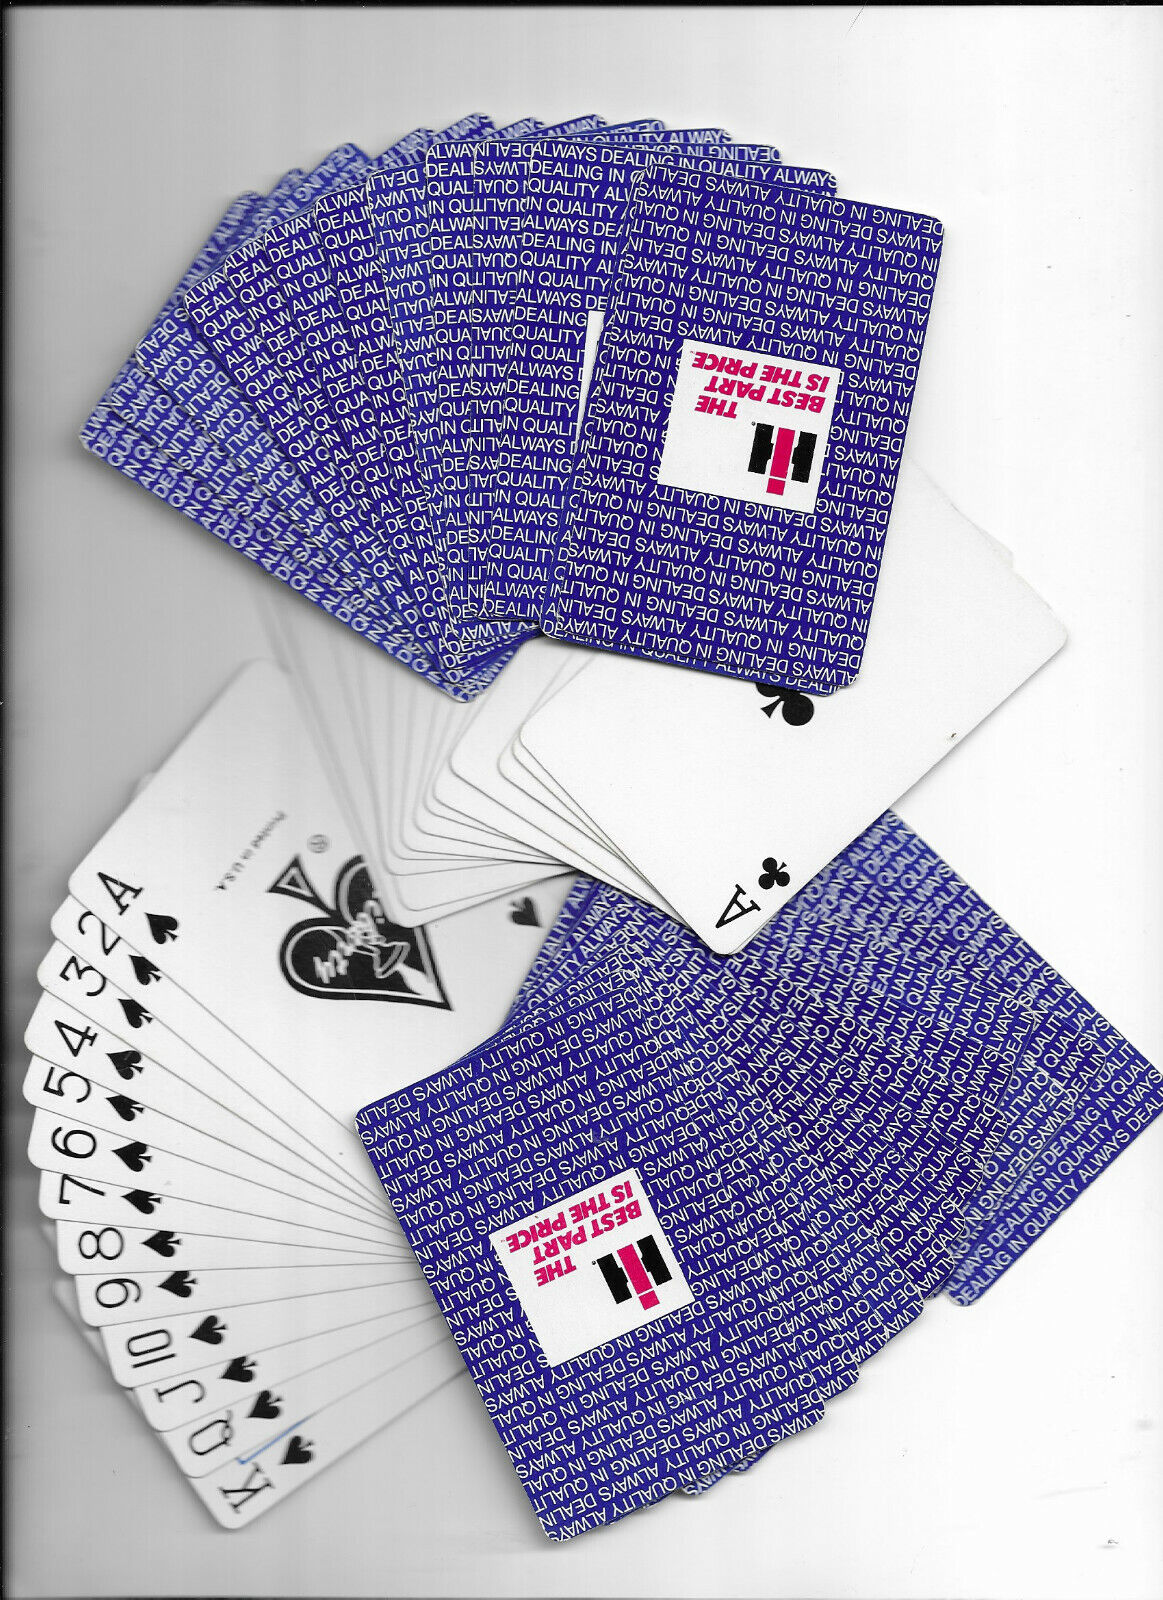 International Harvester Dealer Playing Cards The Best Part is the Price